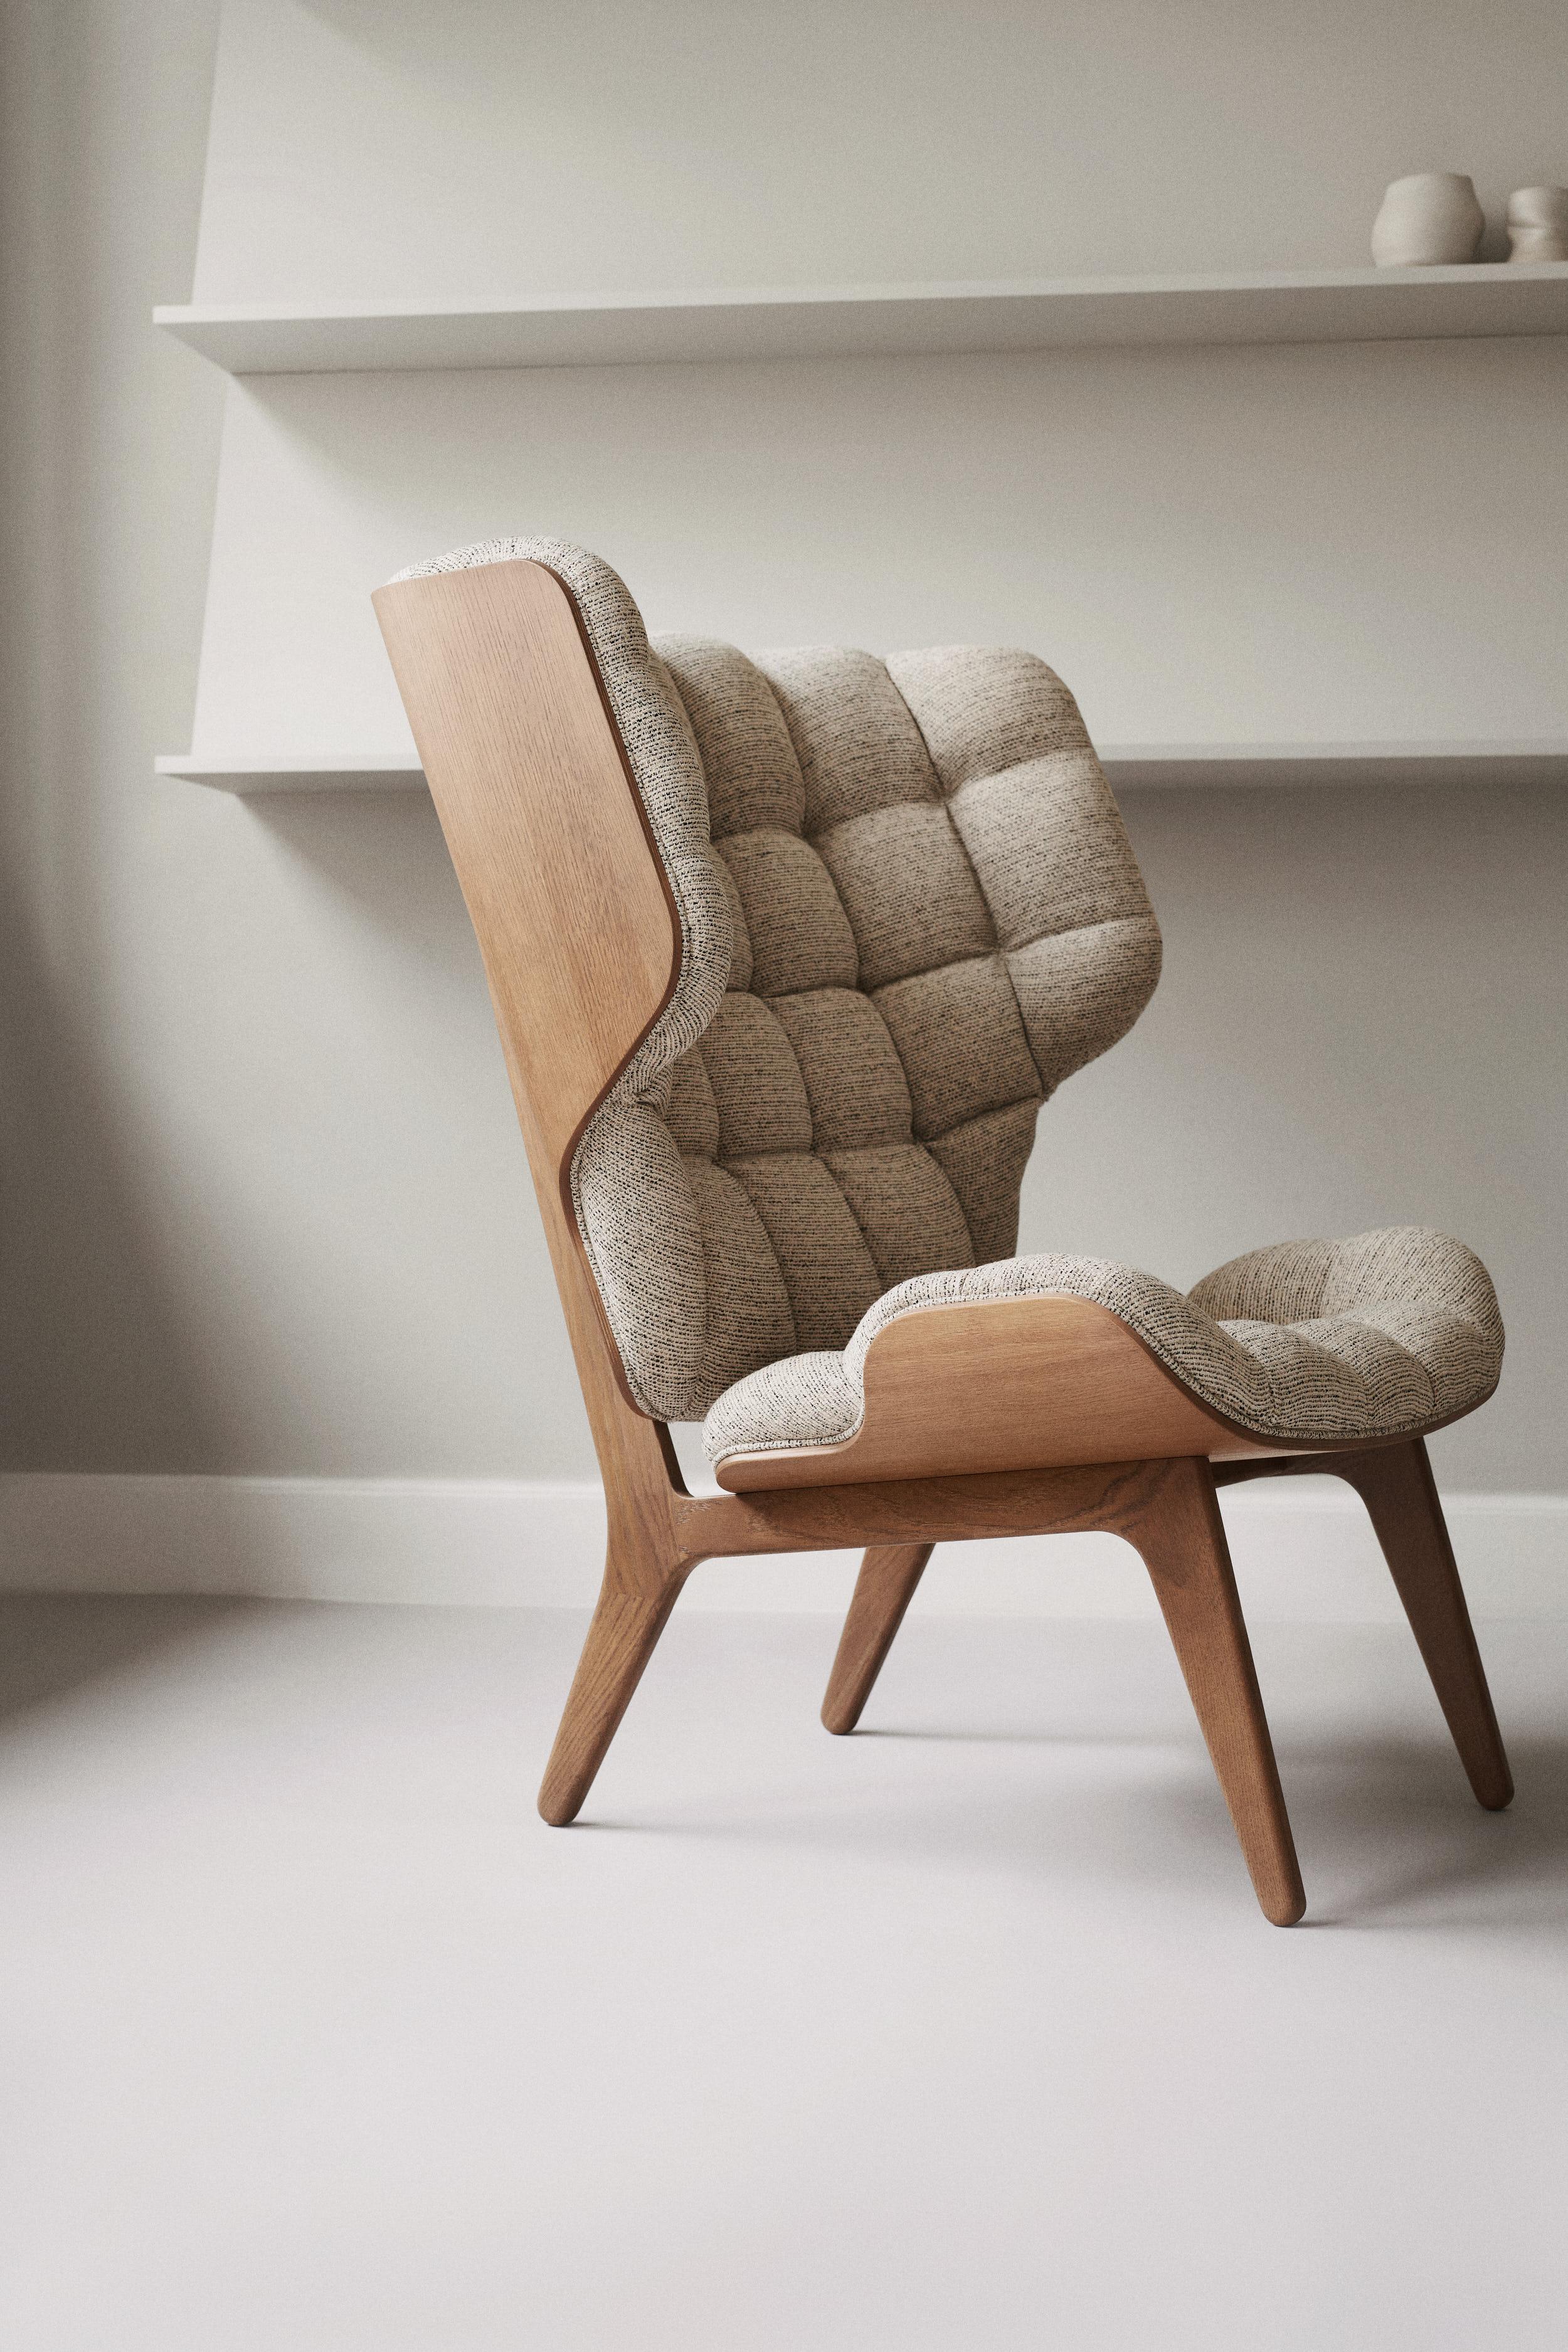 Danish Contemporary 'Mammoth' Chair by Norr11, Natural Oak, Barnum Bouclé 15 For Sale